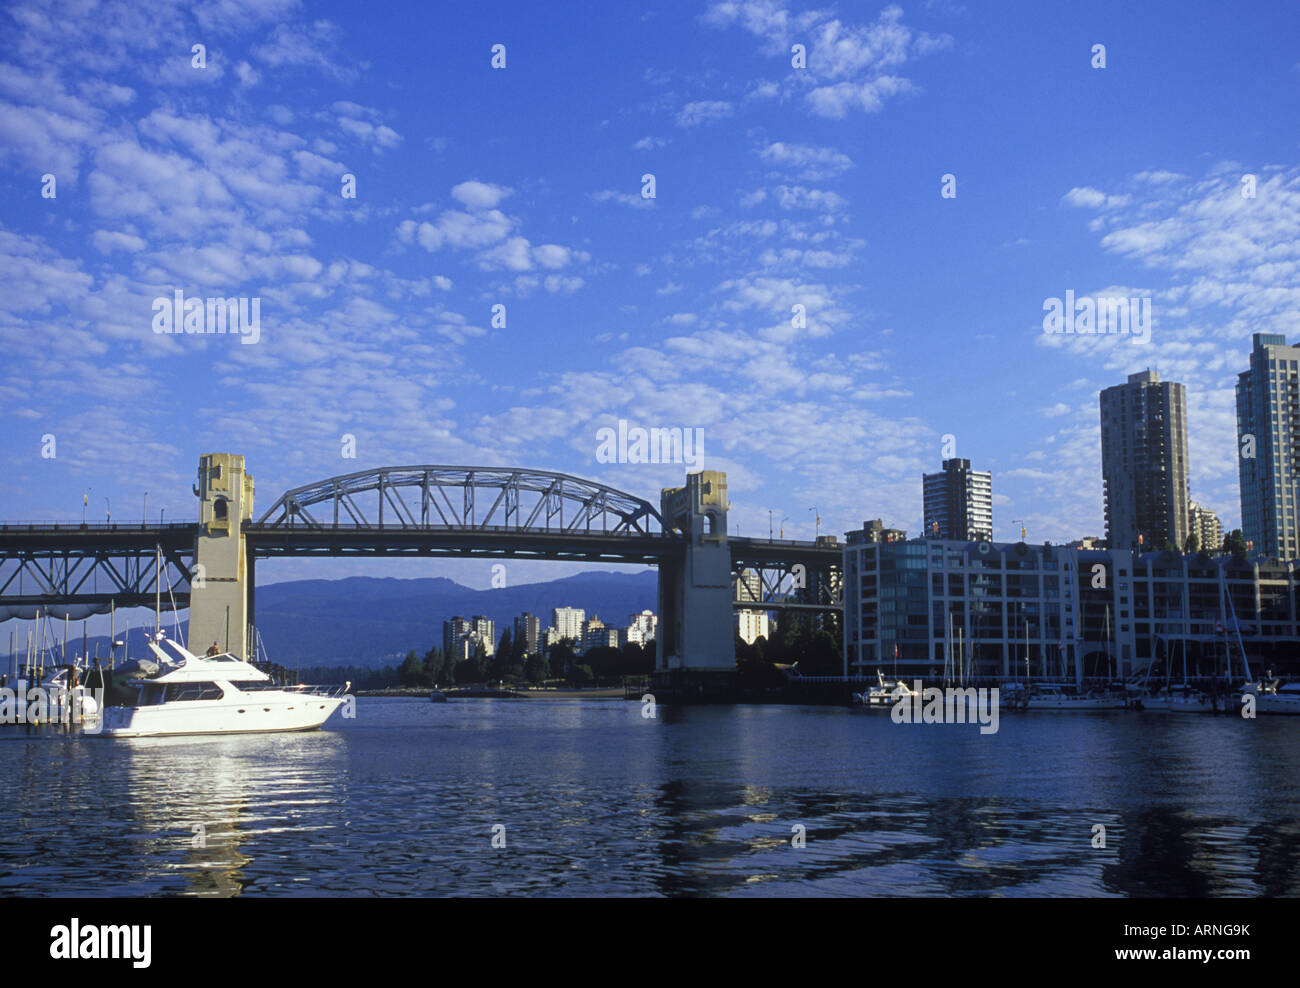 Burrard bridge frames view to West End, with yacht underway, Vancouver, British Columbia, Canada. Stock Photo